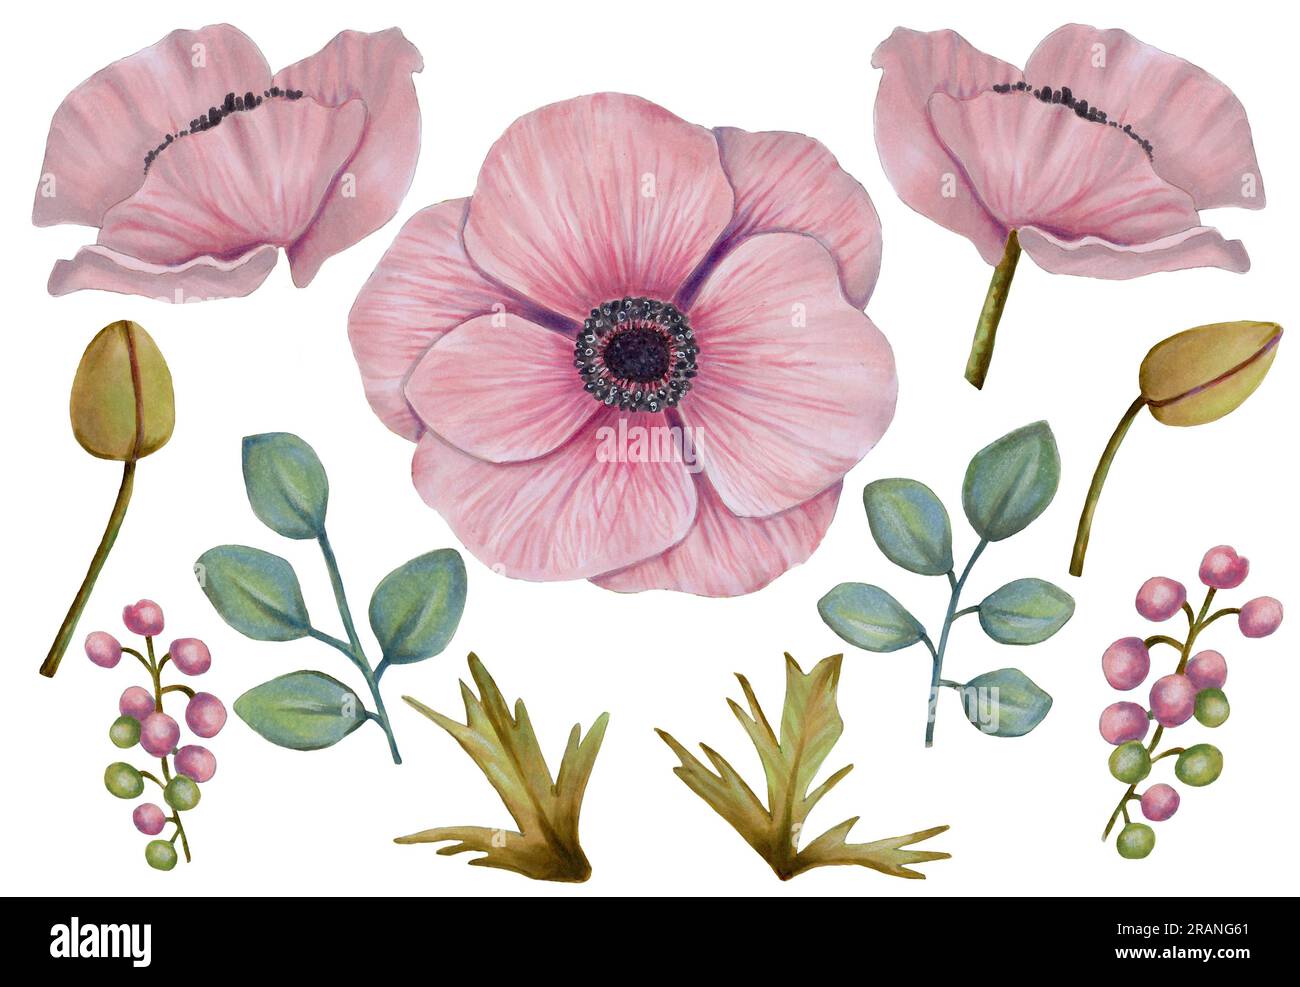 Set of anemone flower elements. Blue green twigs, berries, pink anemone flowers, anemone leaves. Watercolor and marker illustration. Ideal for design Stock Photo